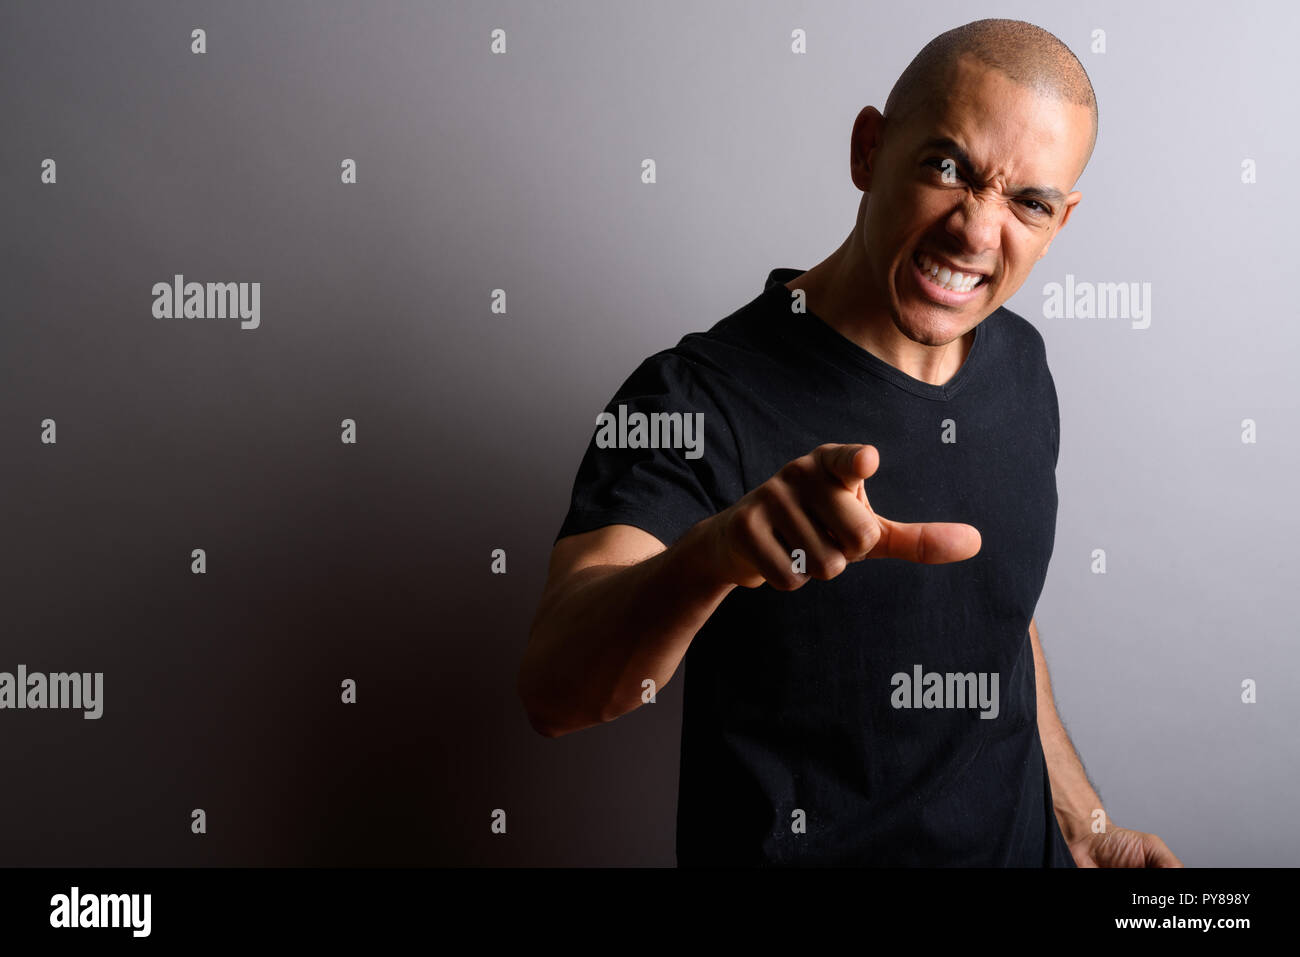 Man looking angrily at camera while screaming and pointing finger Stock Photo